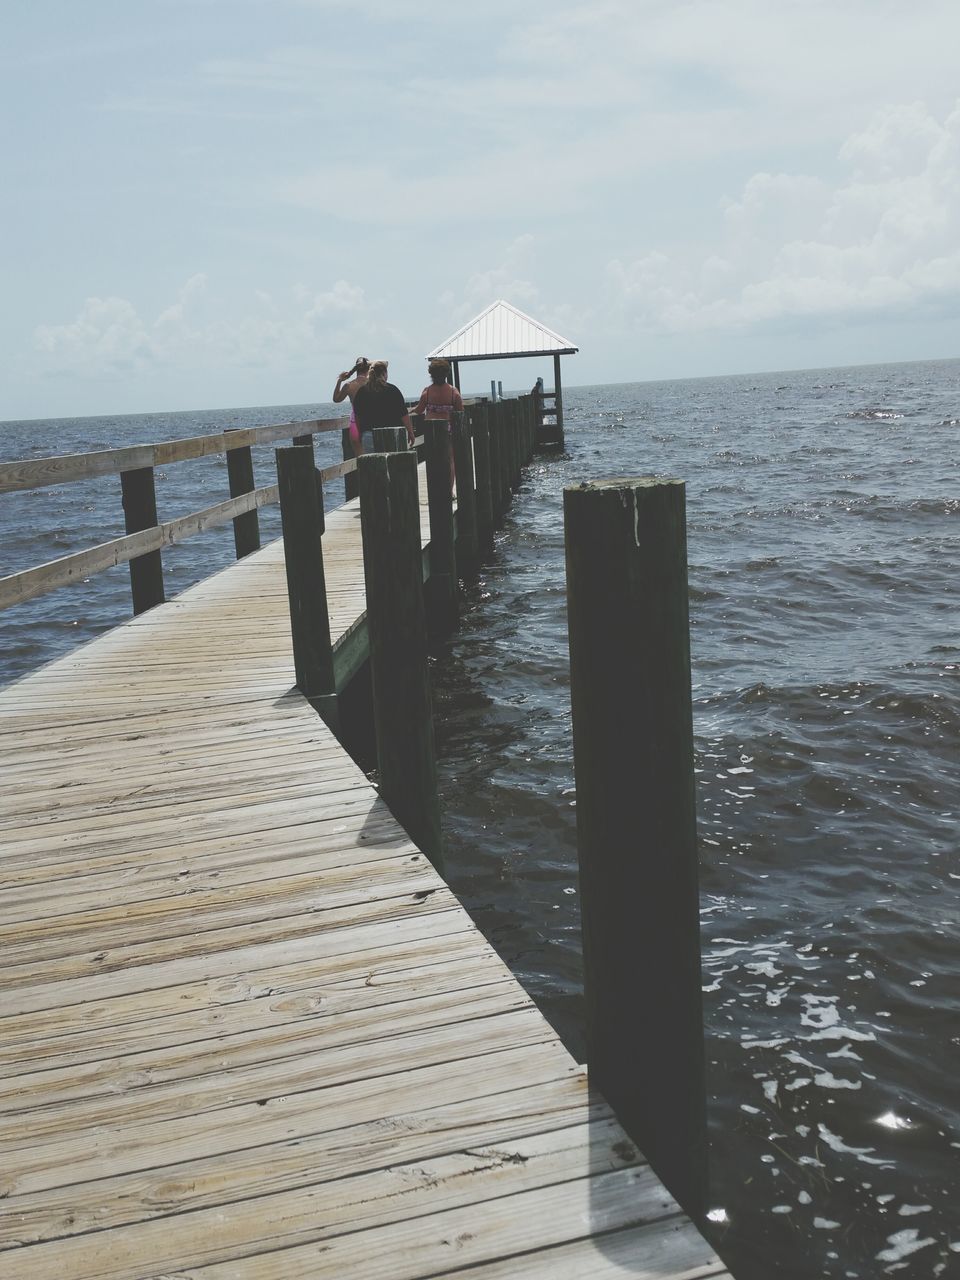 water, sea, pier, horizon over water, sky, tranquil scene, tranquility, scenics, wood - material, men, nature, leisure activity, beach, railing, beauty in nature, jetty, lifestyles, person